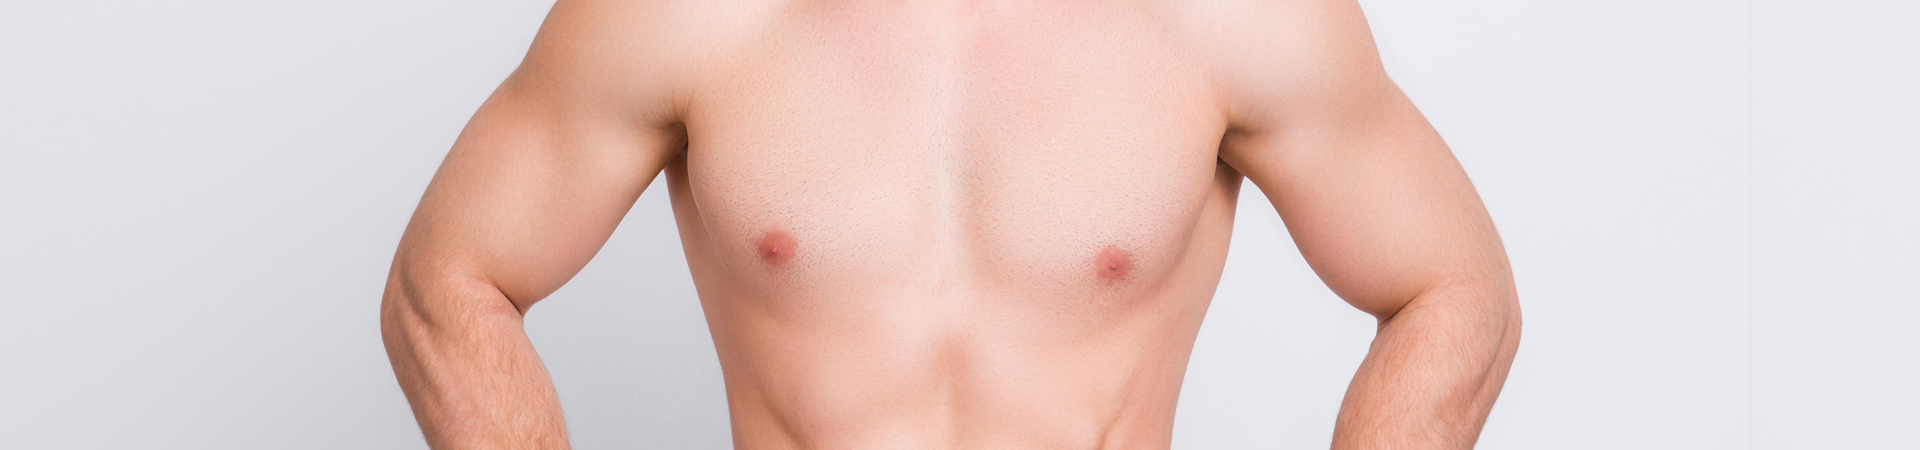 Smaller Breasts Have Perks - Andrew Trussler, MD, PLLC